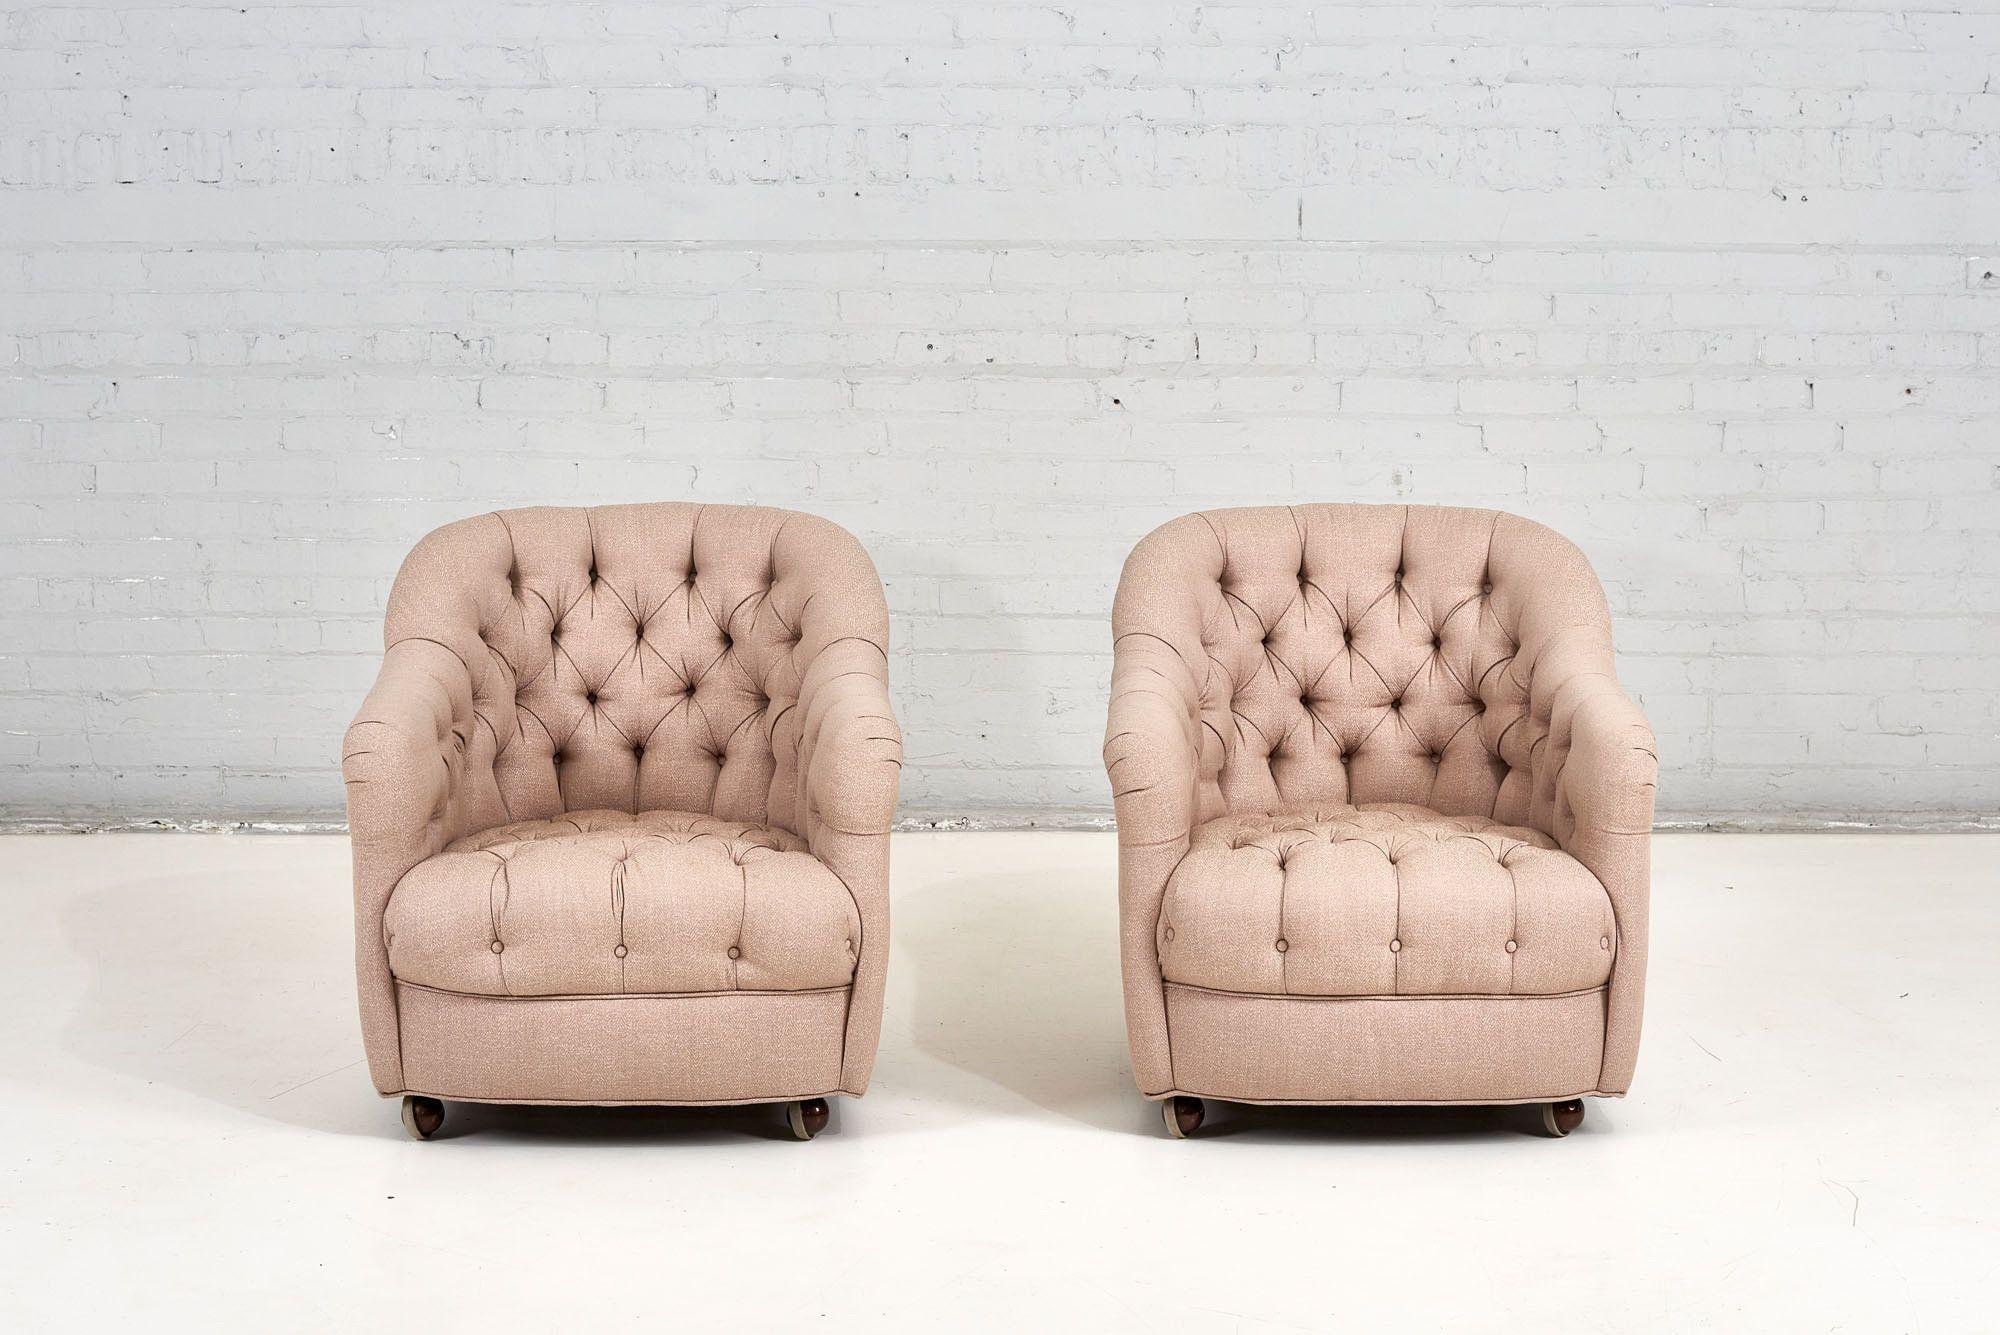 Ward Bennett tufted lounge chairs, 1960. Original upholstery in excellent condition.